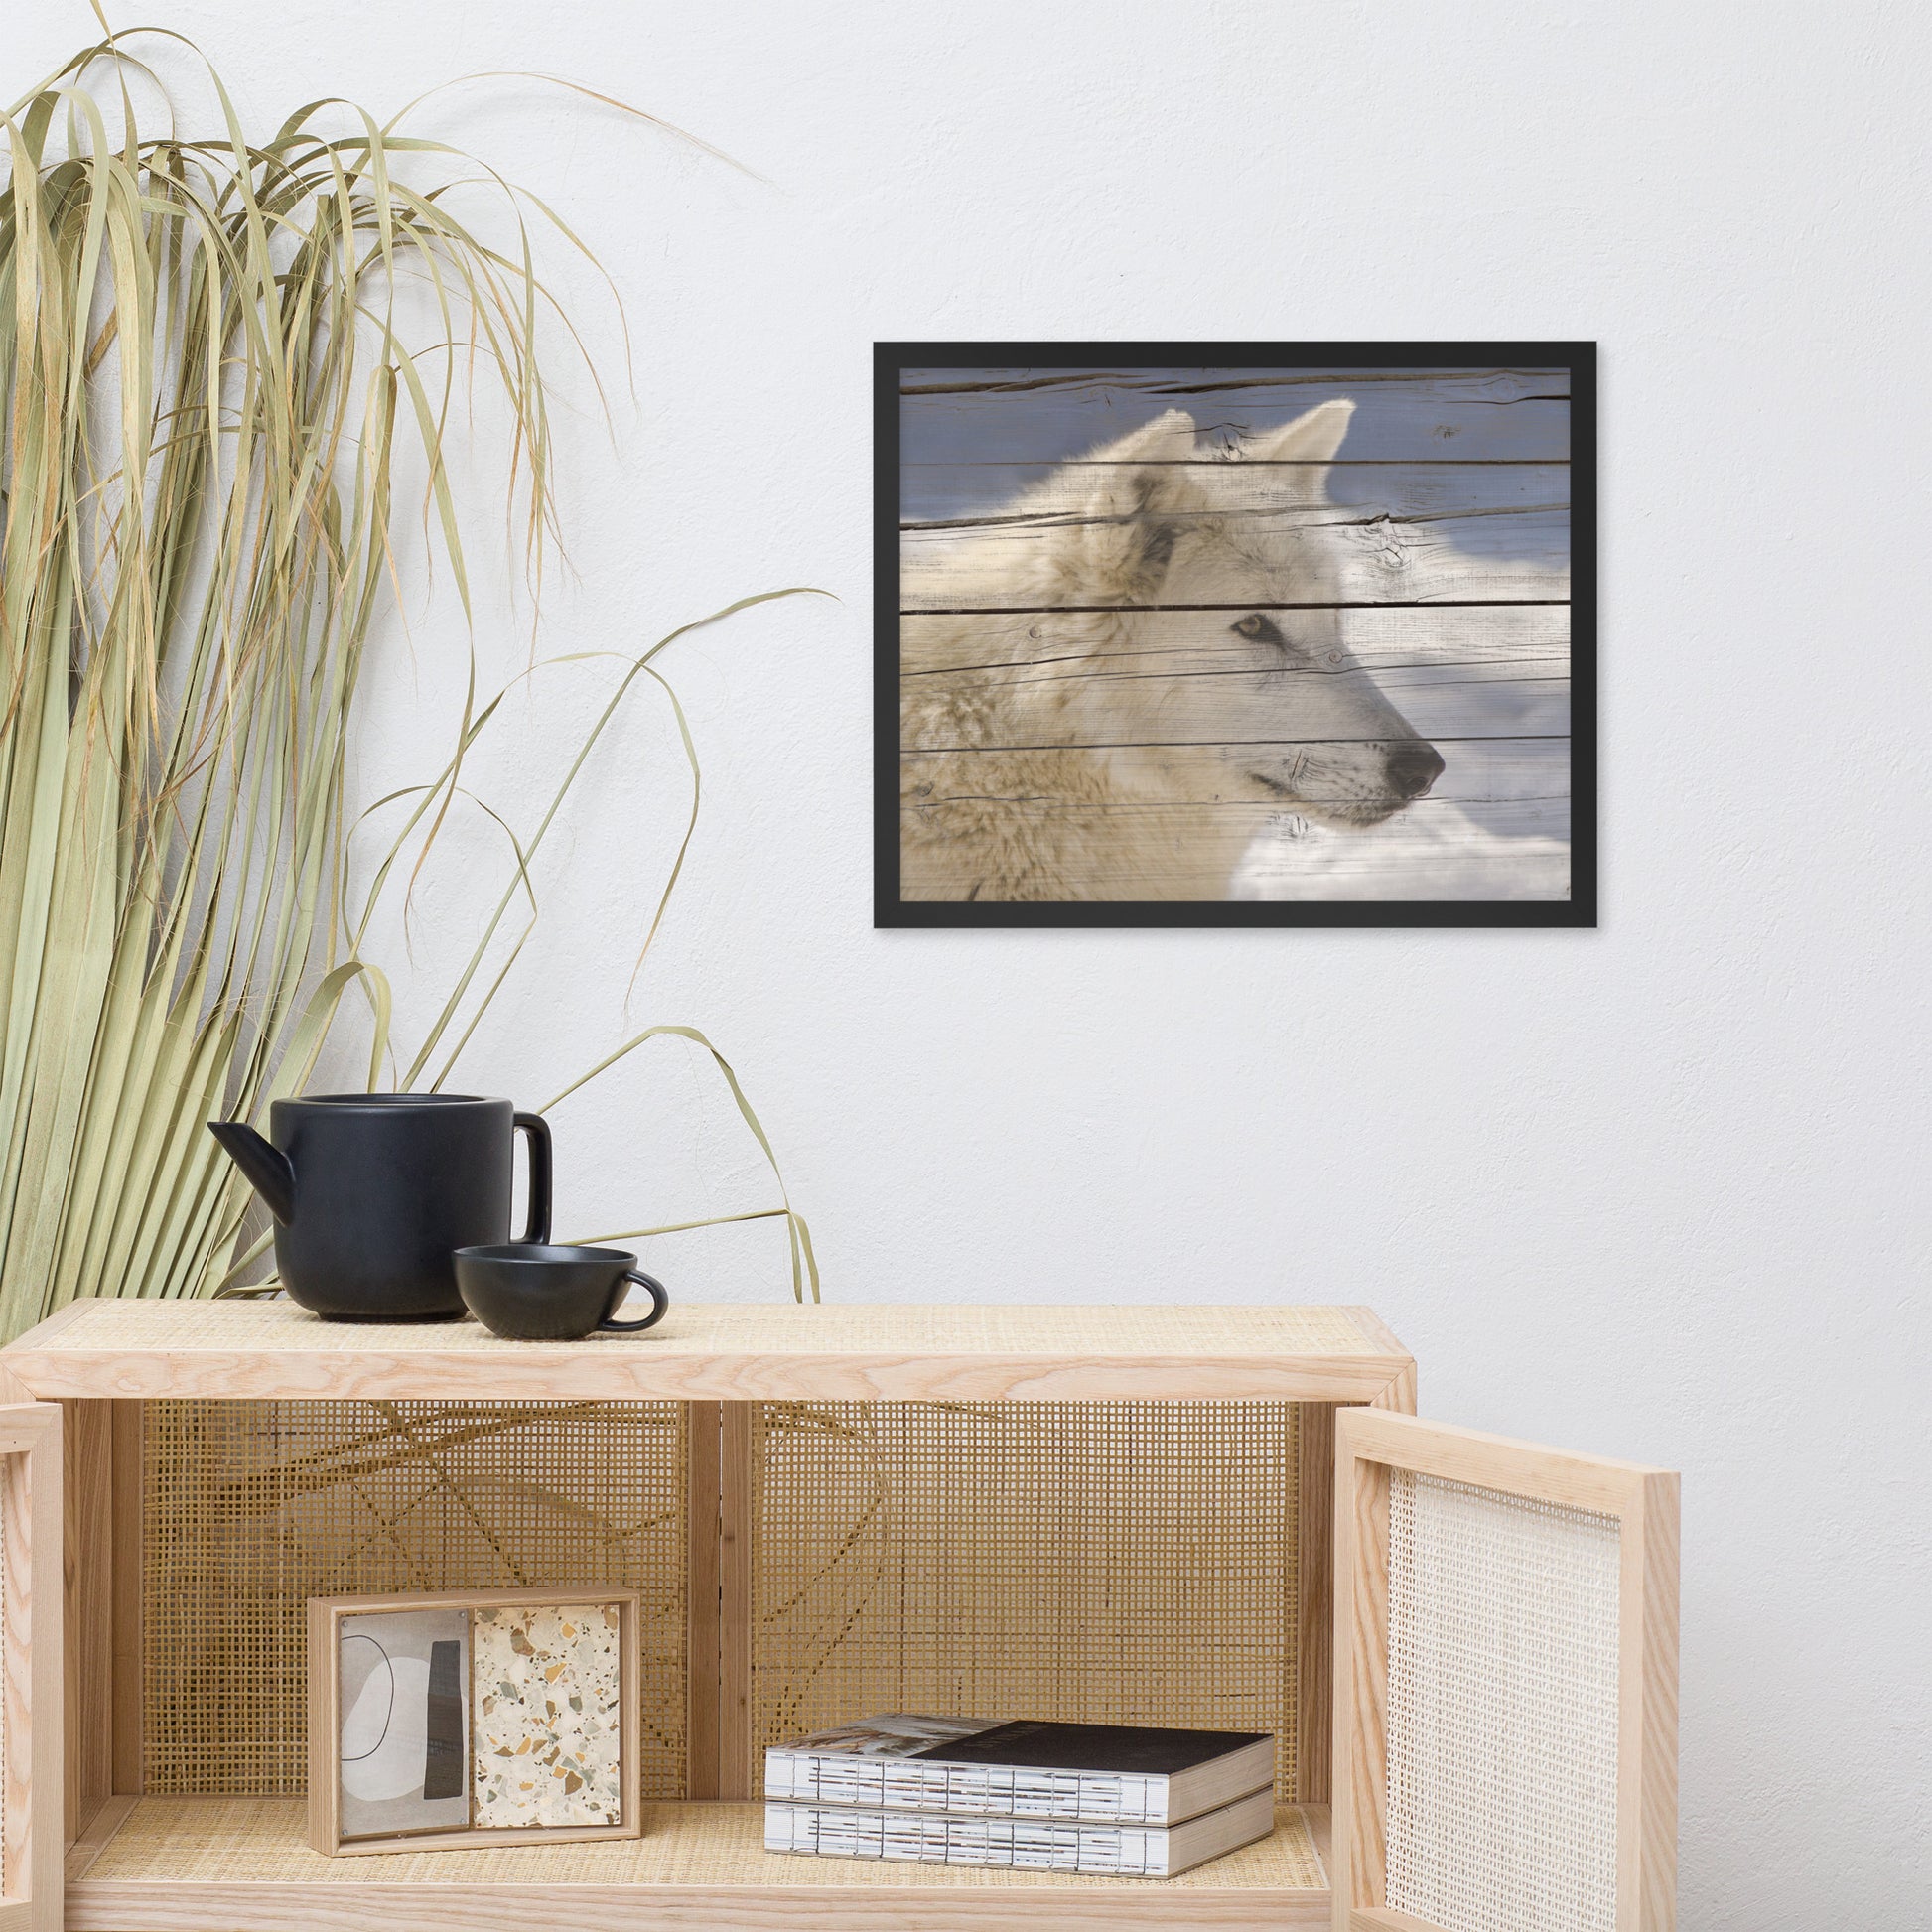 Abstract Office Wall Art: Aries the White Wolf Portrait on Faux Weathered Wood Texture / Animal / Wildlife / Nature Photographic Artwork - Framed Artwork - Wall Decor